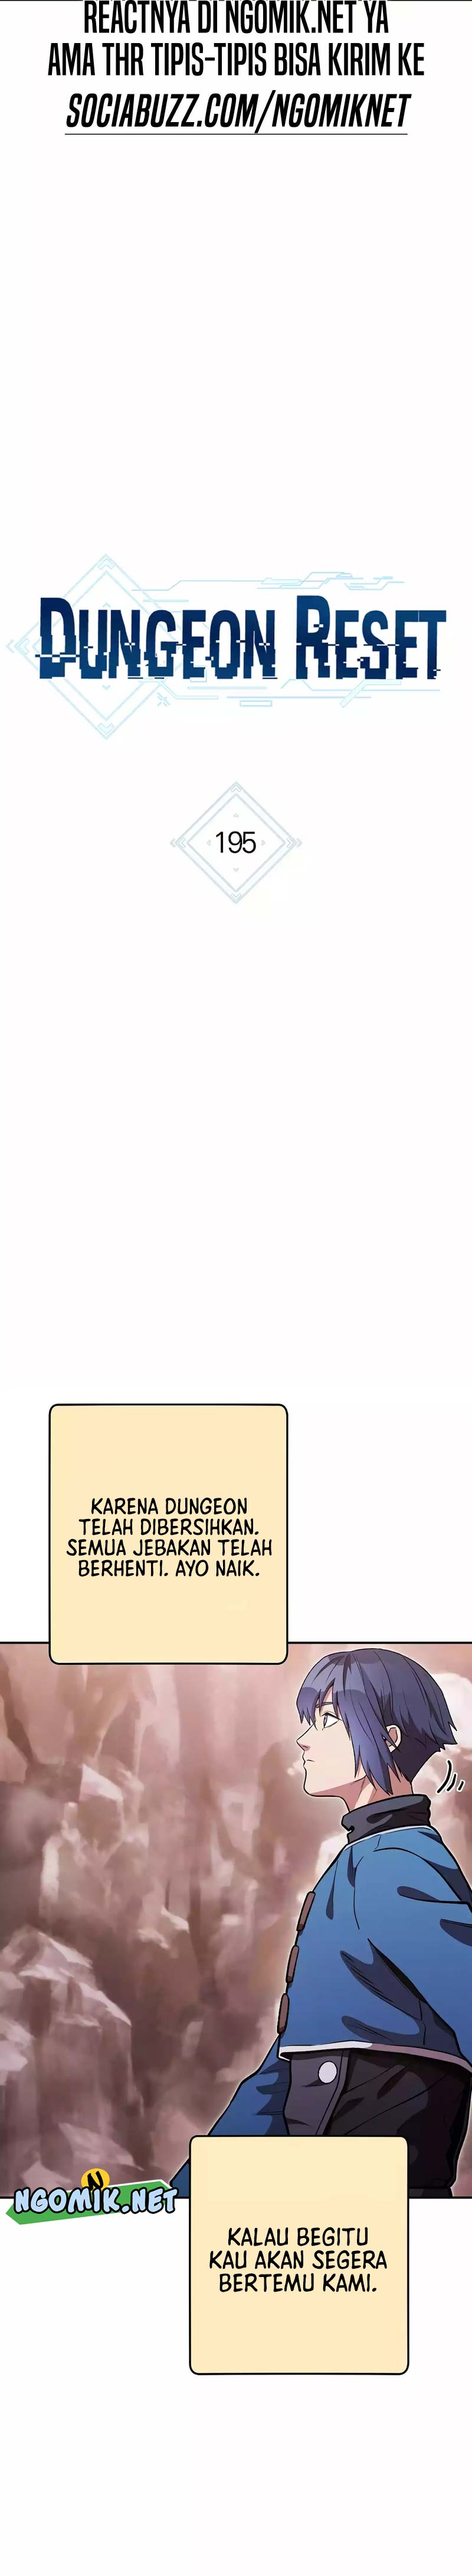 Dungeon Reset Chapter 195 Image 4